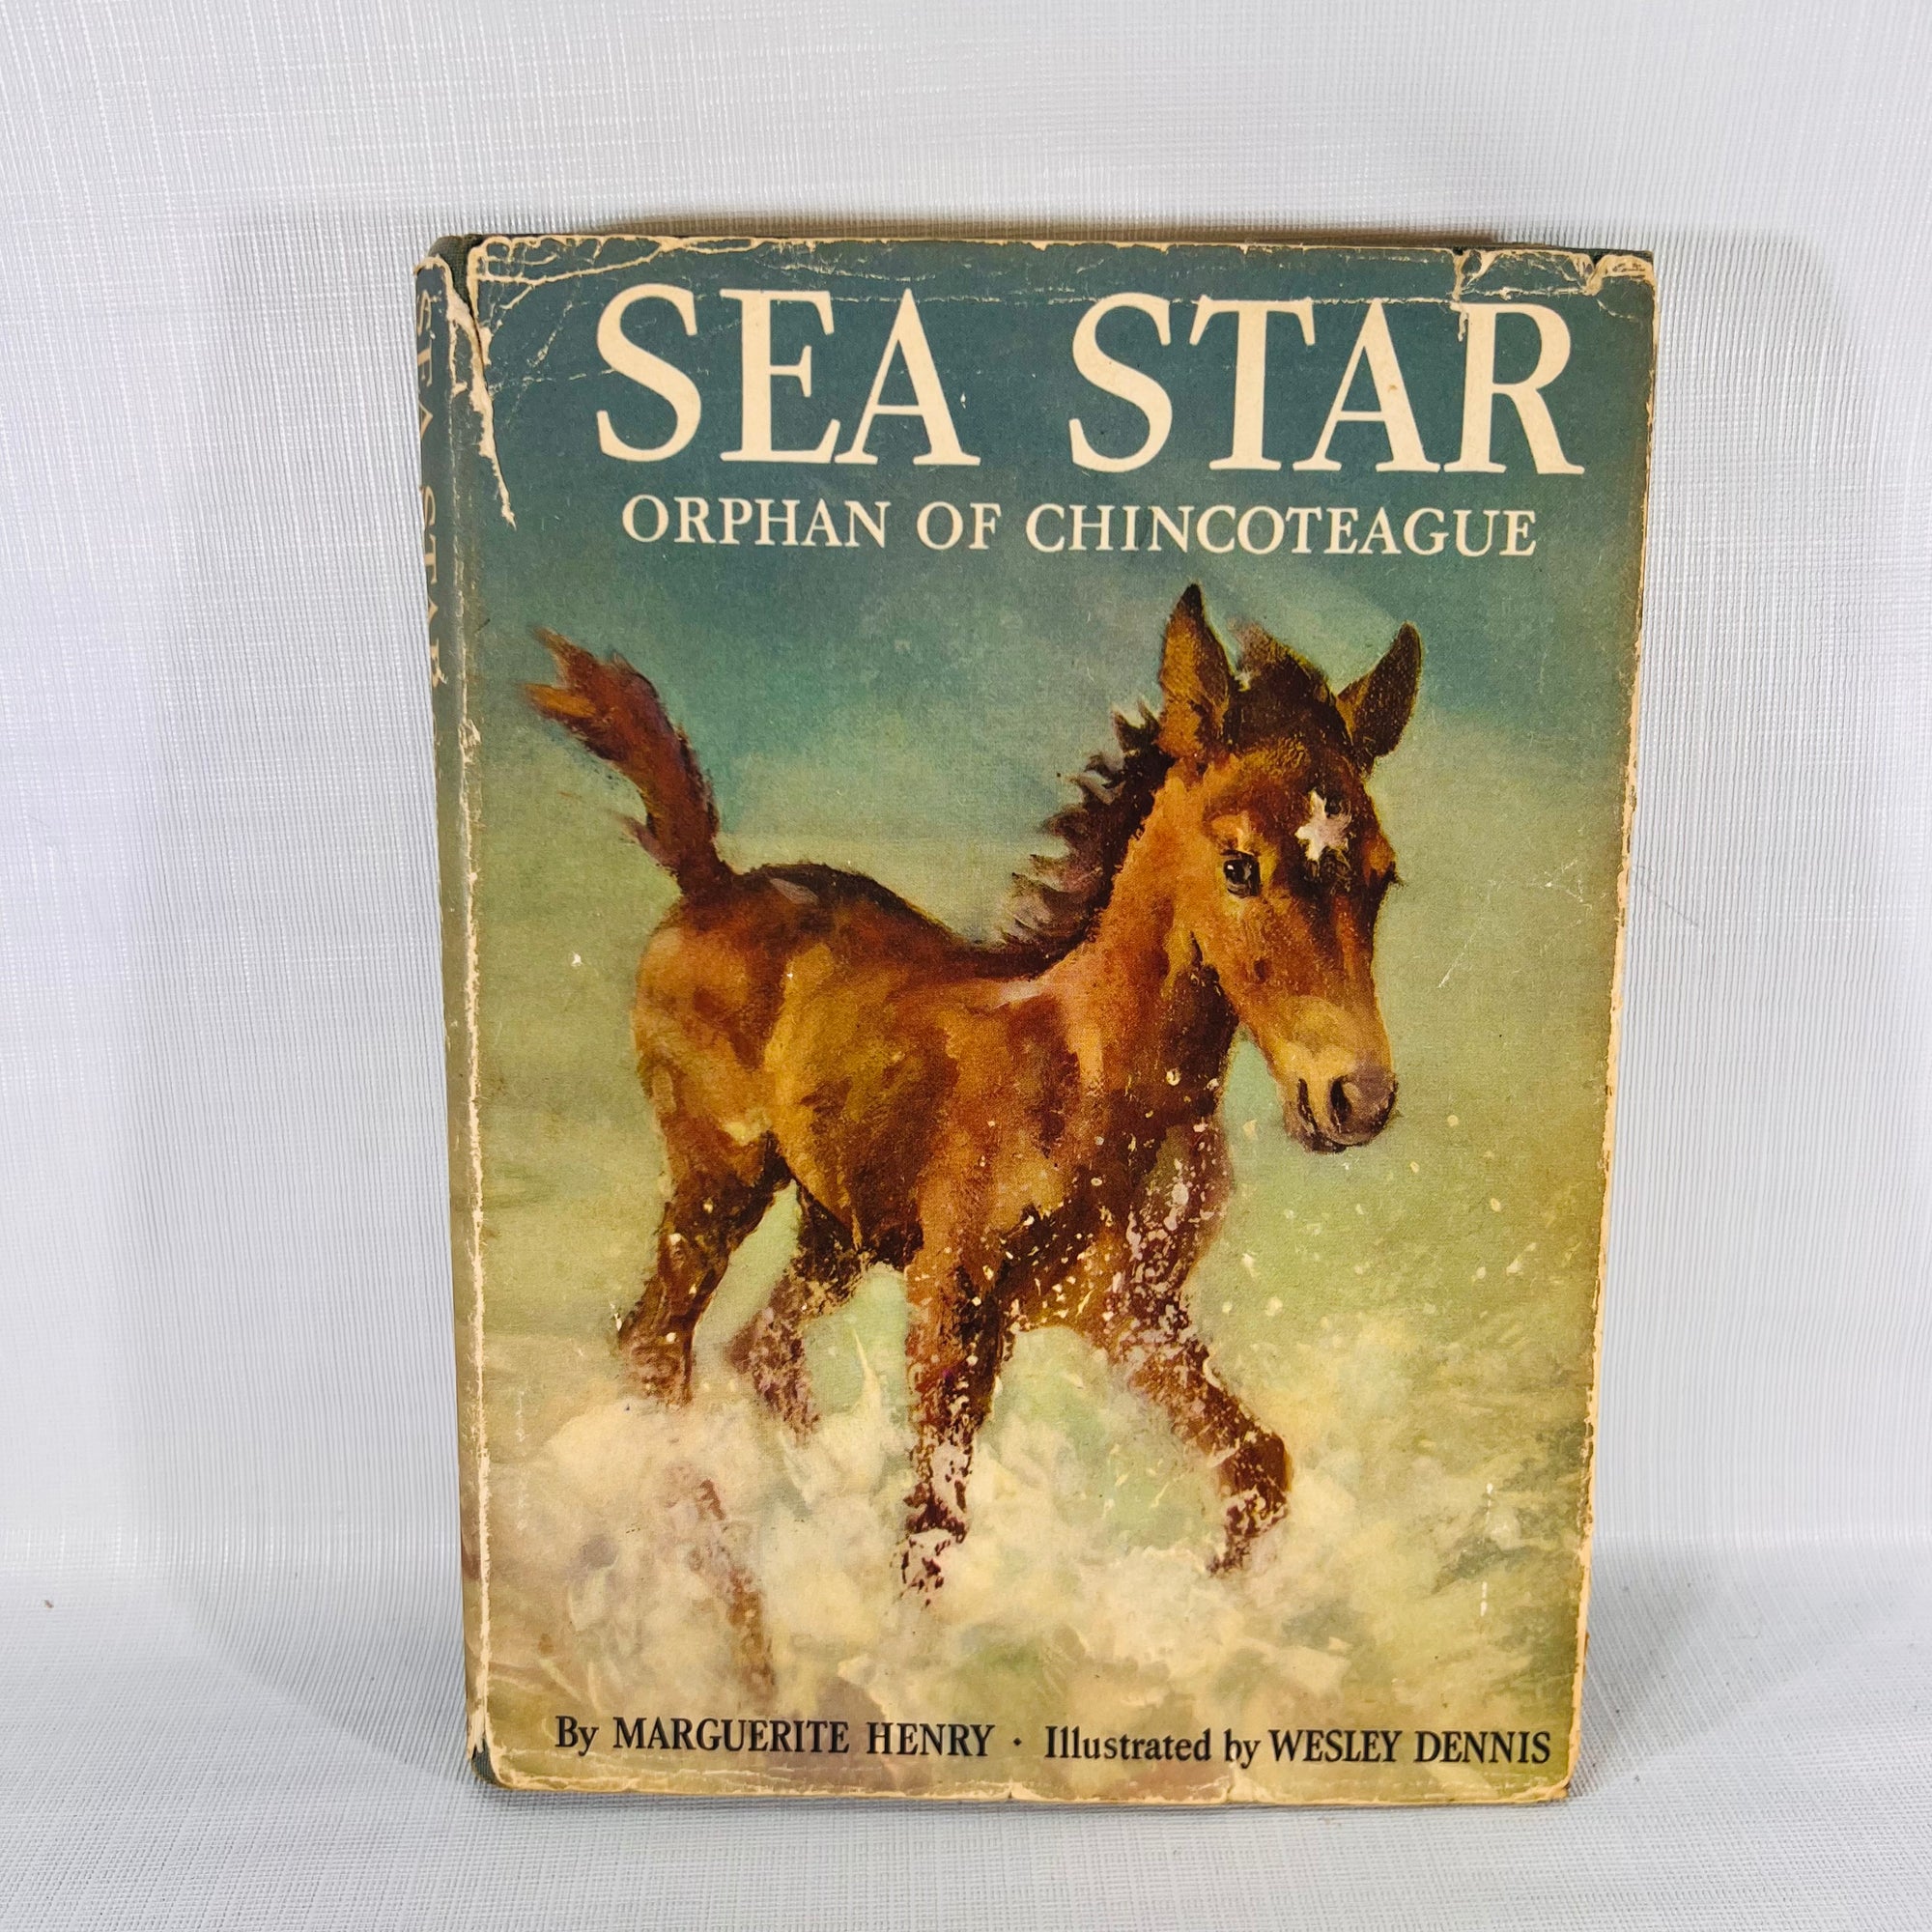 Sea Star Orphan of Chincoteague by Marguerite Henry illustrated by Wesley Denins 1950 Rand McNally & Co